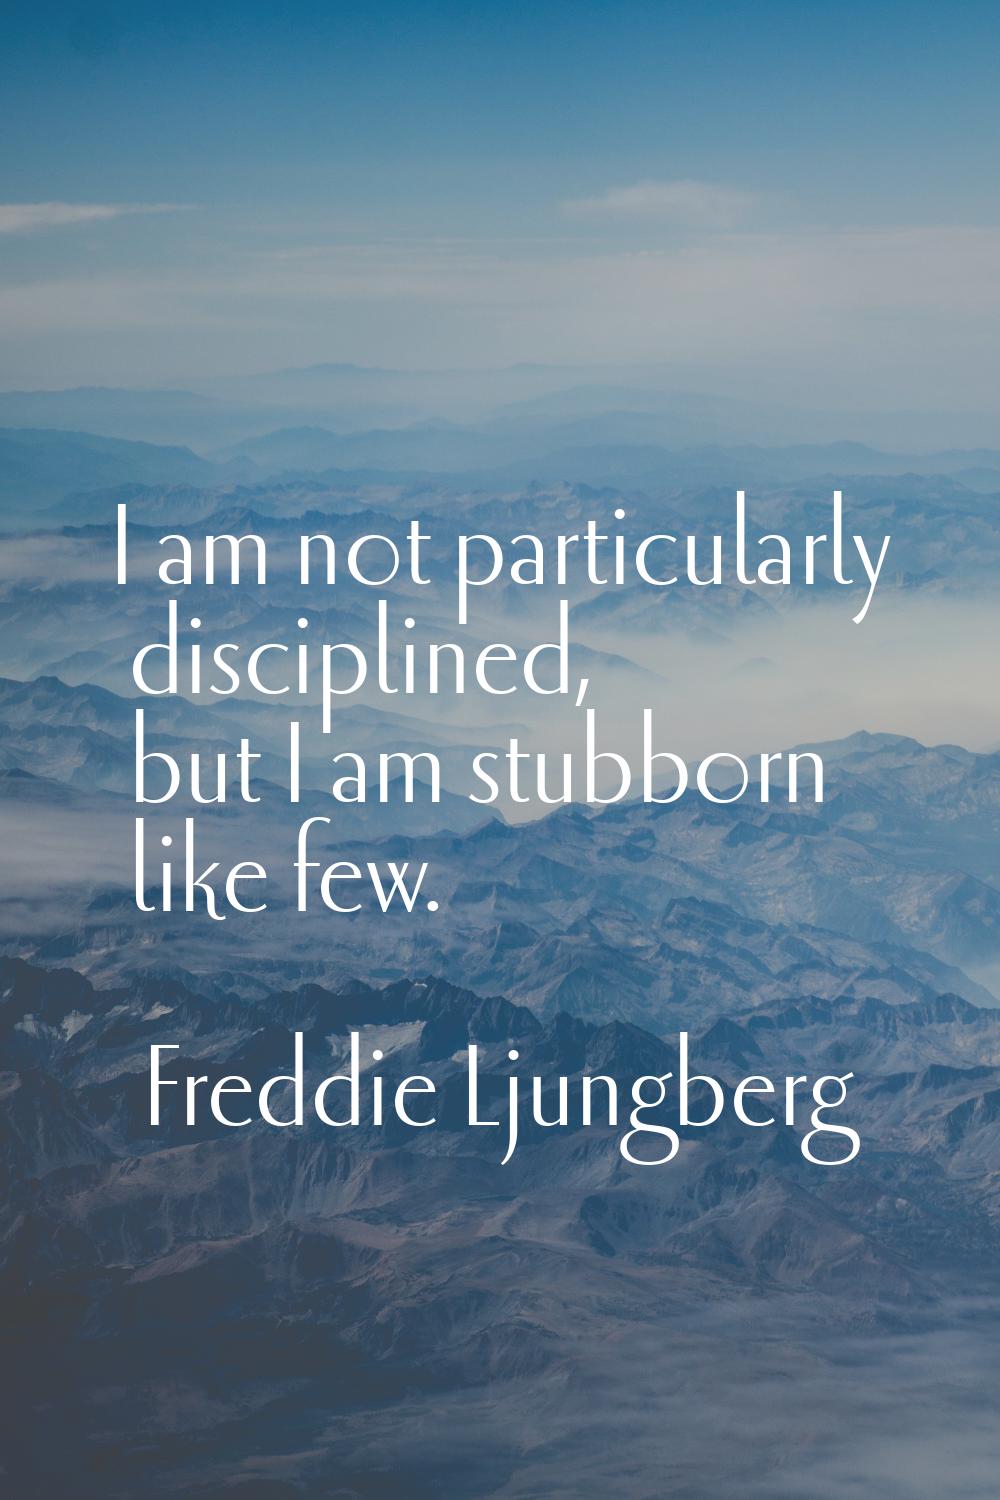 I am not particularly disciplined, but I am stubborn like few.